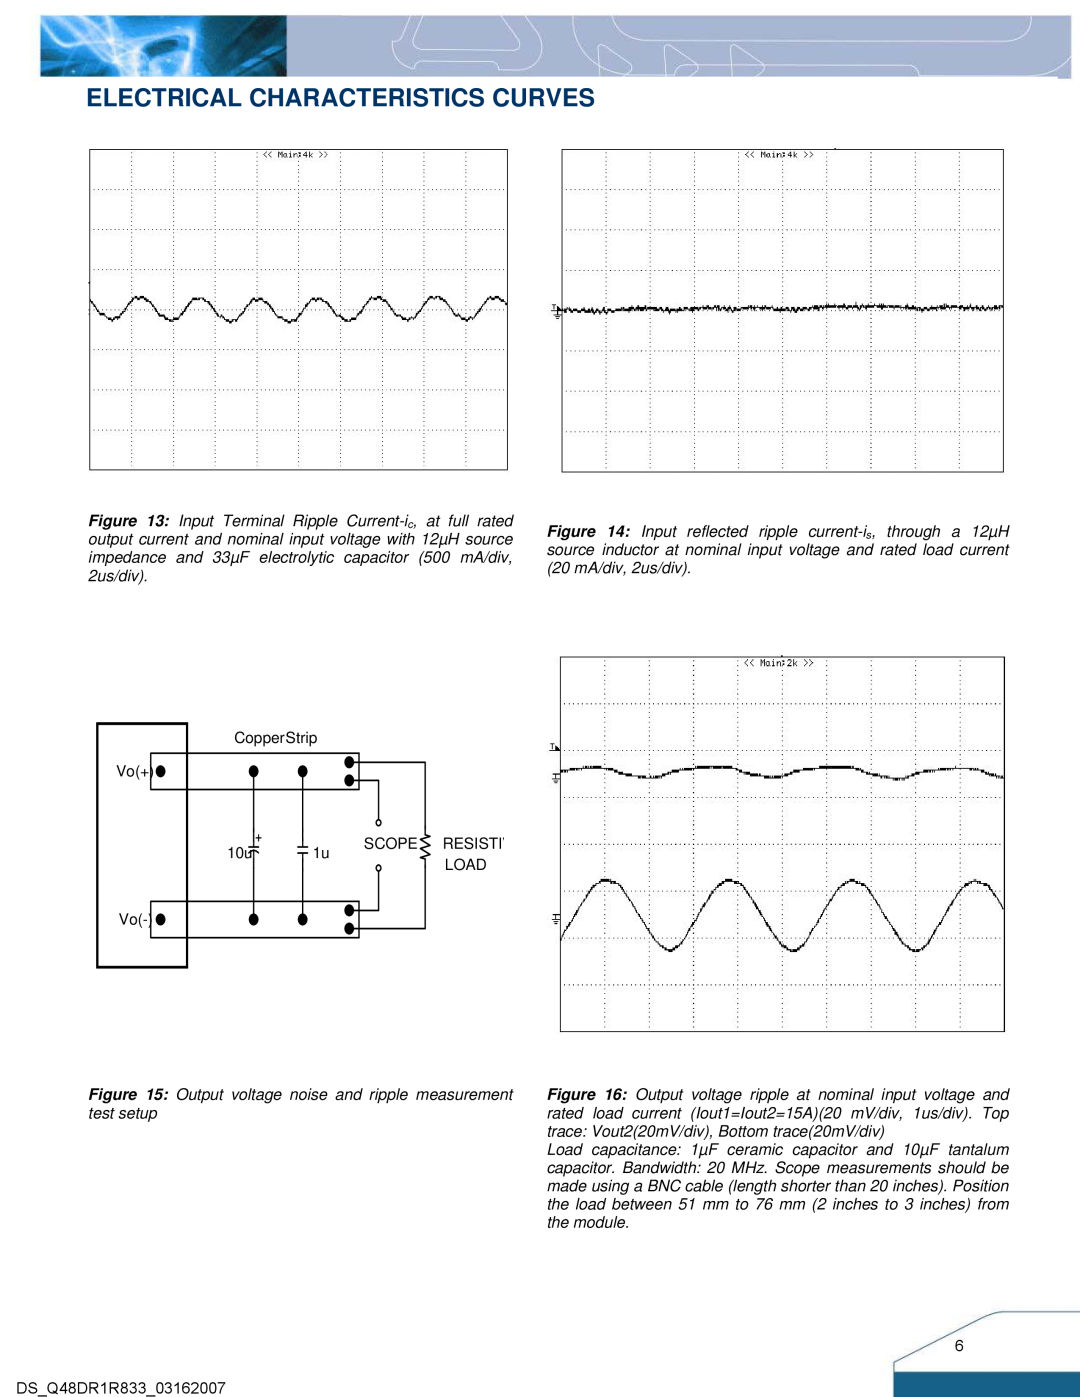 Delta Electronics Series Q48DR manual Electrical Characteristics Curves, Vo+ Vo, CopperStrip, Load 